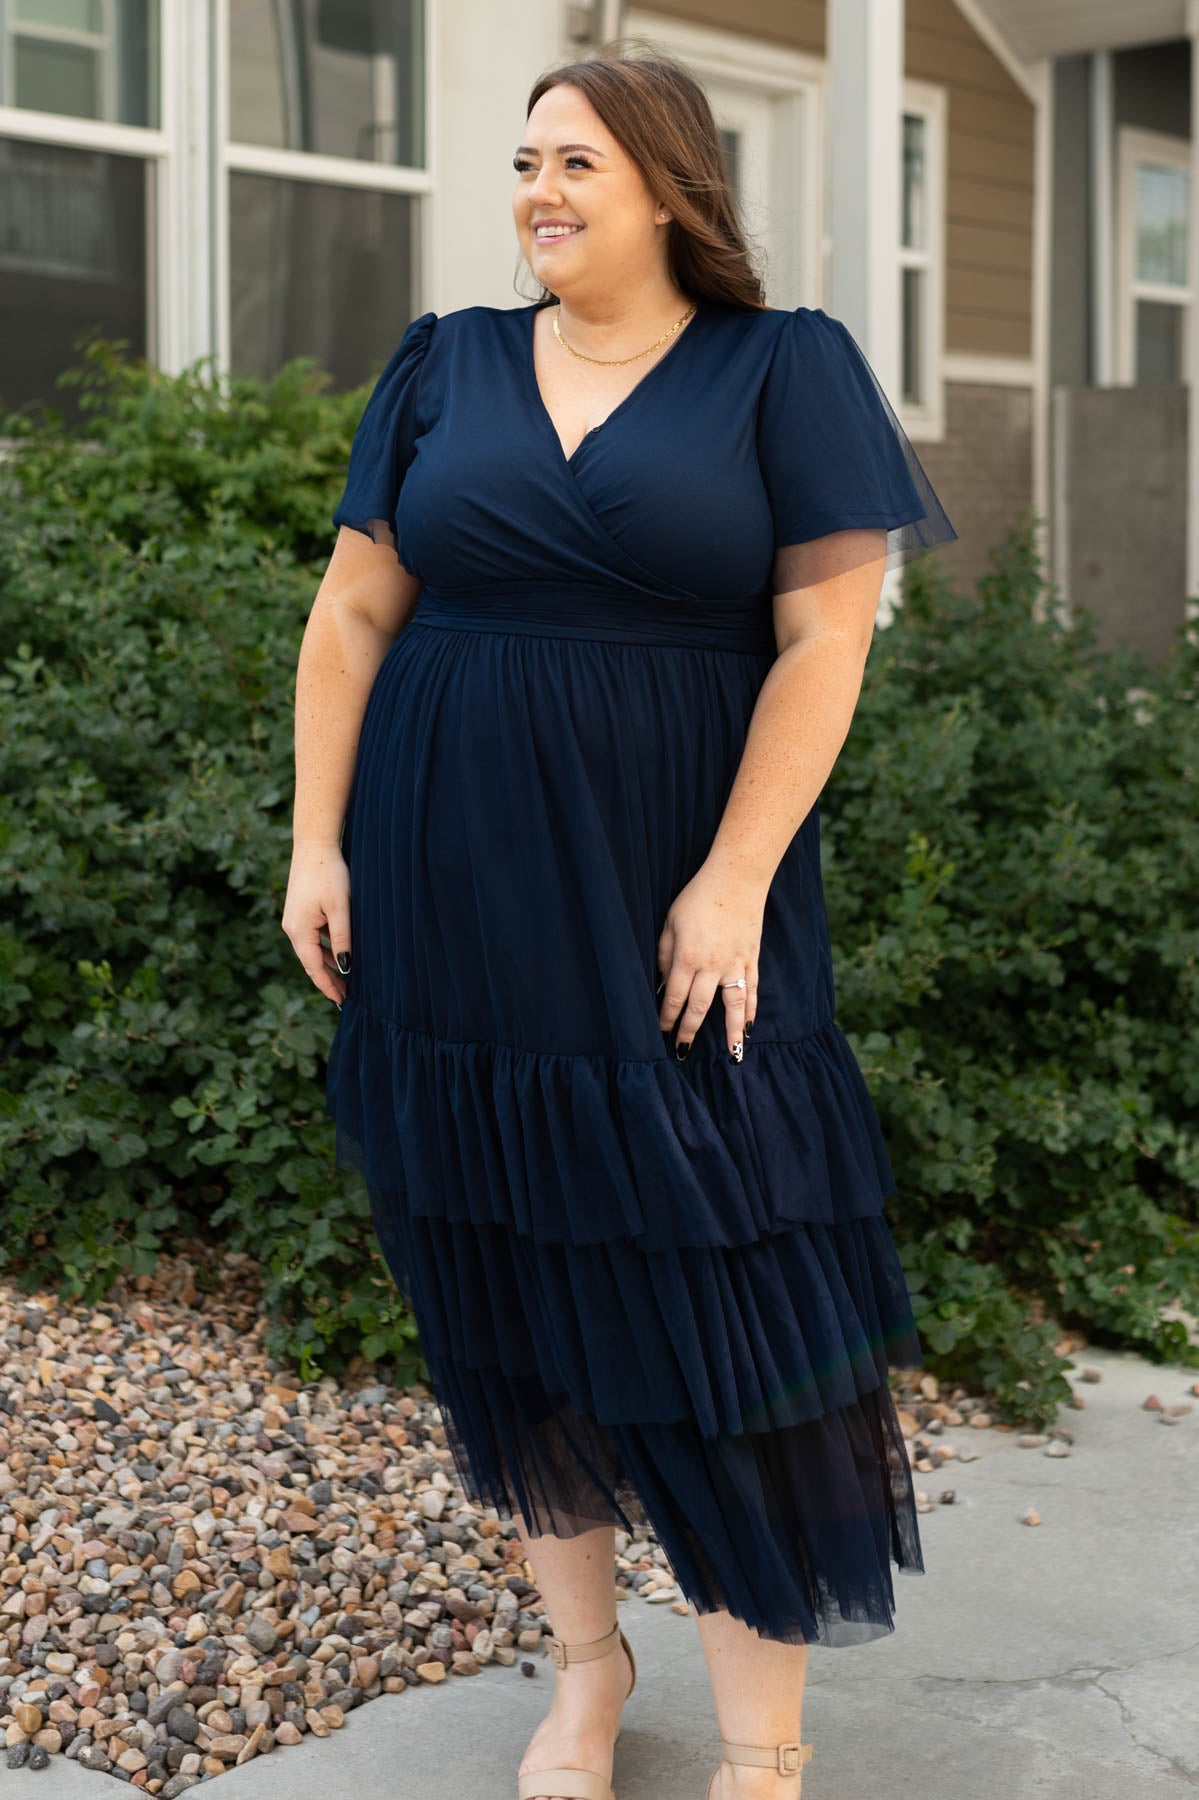 Short sleeve plus size navy tiered dress with v neck